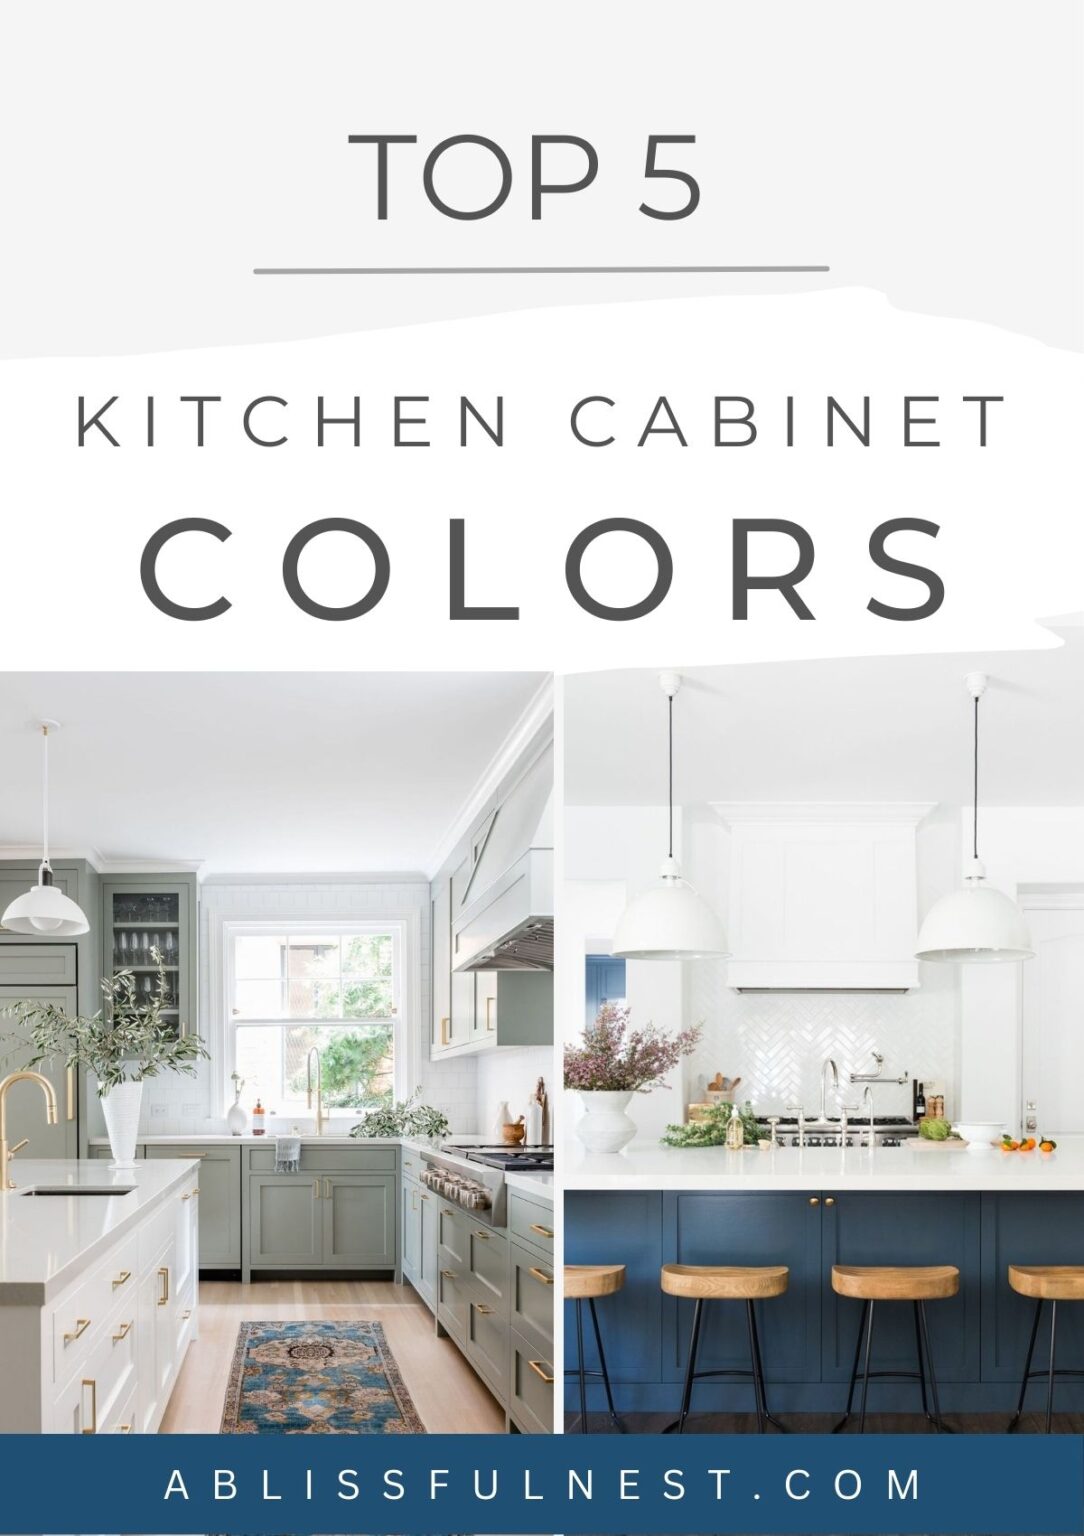 Top 5 Kitchen Cabinet Colors - A Blissful Nest